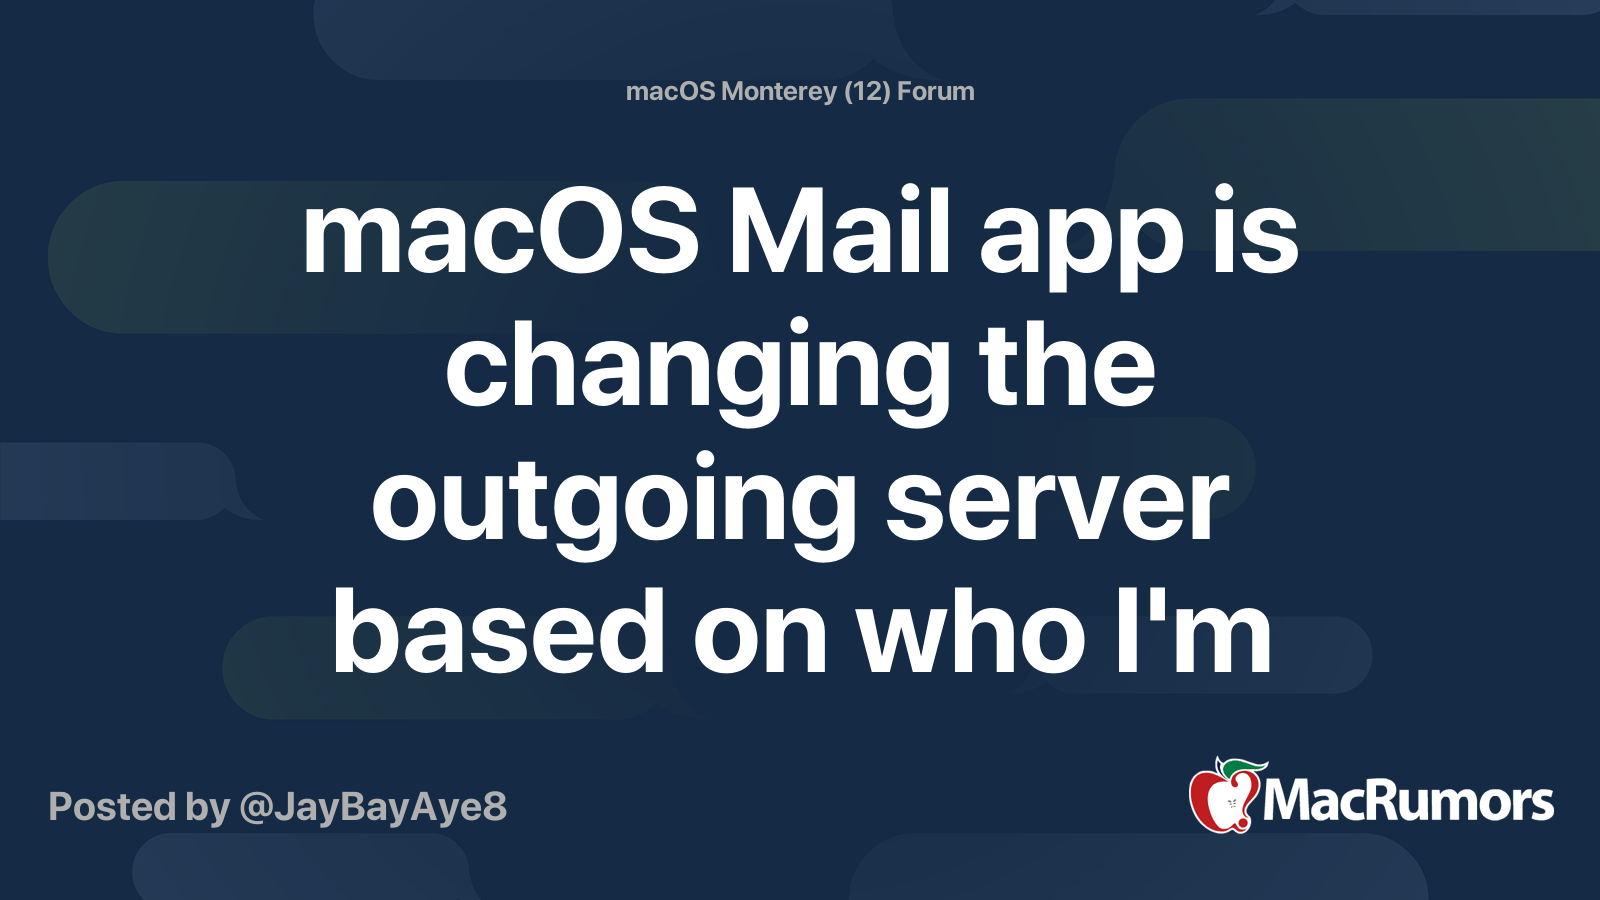 macOS Mail app is changing the outgoing server based on who I’m sending the email to